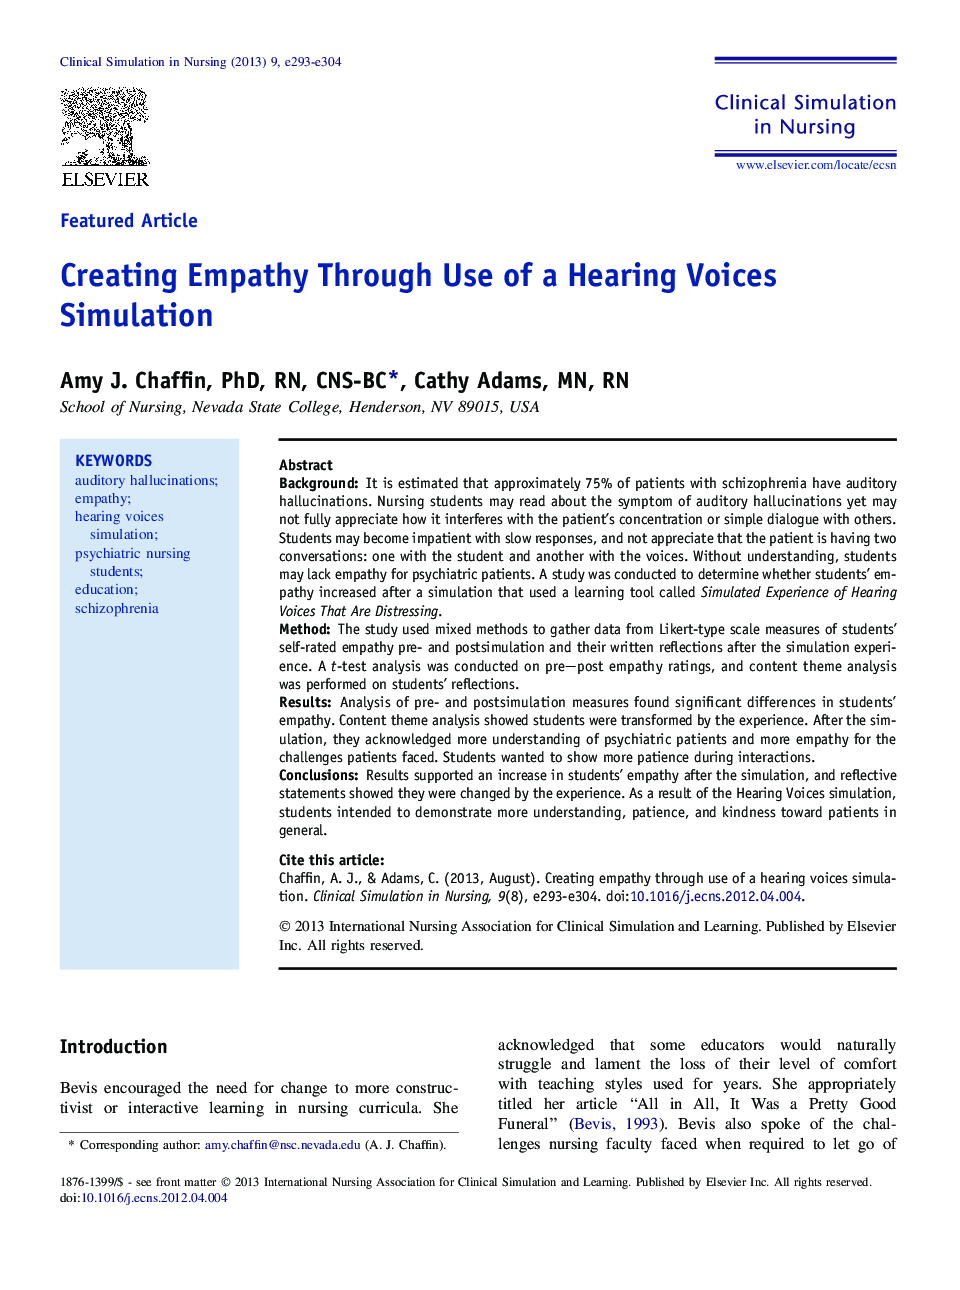 Creating Empathy Through Use of a Hearing Voices Simulation